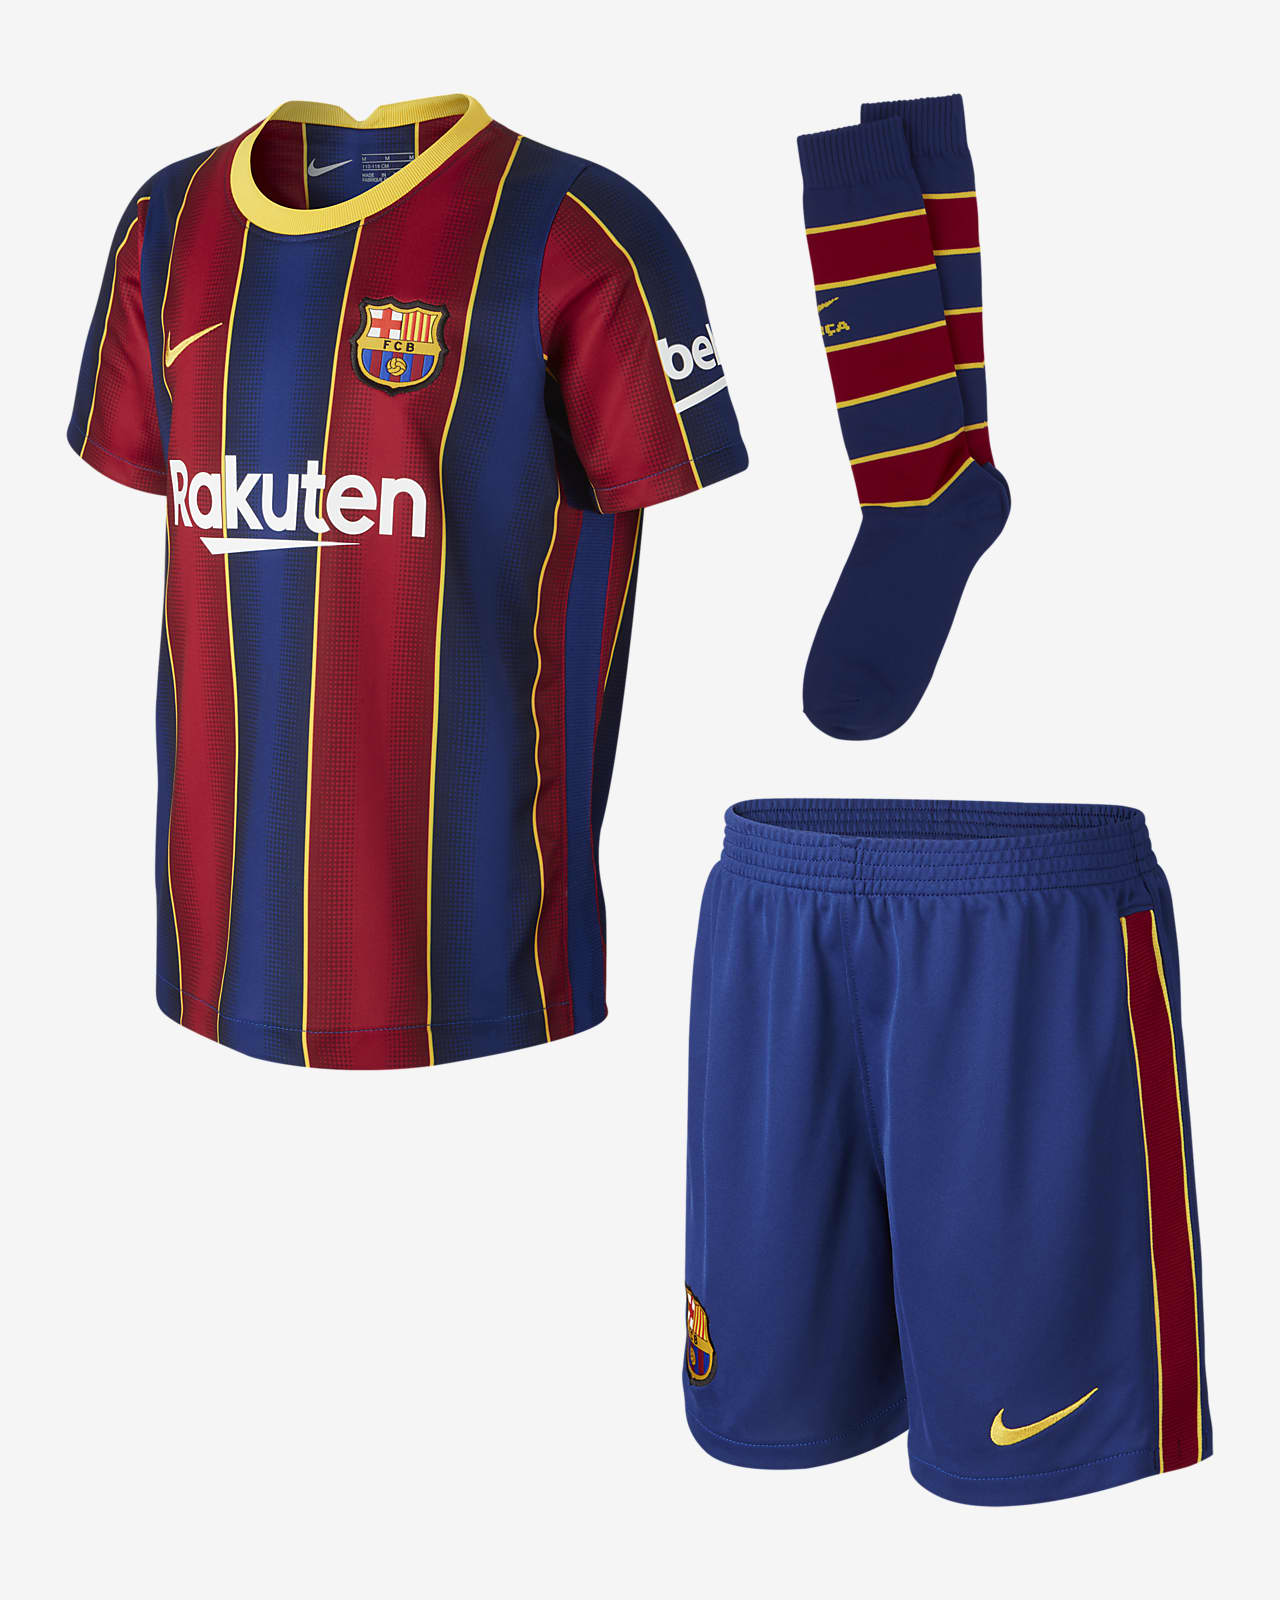 Football Jersey 2021 Barcelona Messi Kids Youth Soccer Gift Set+Shorts Kids Soccer Jersey with Short and Sock Sock